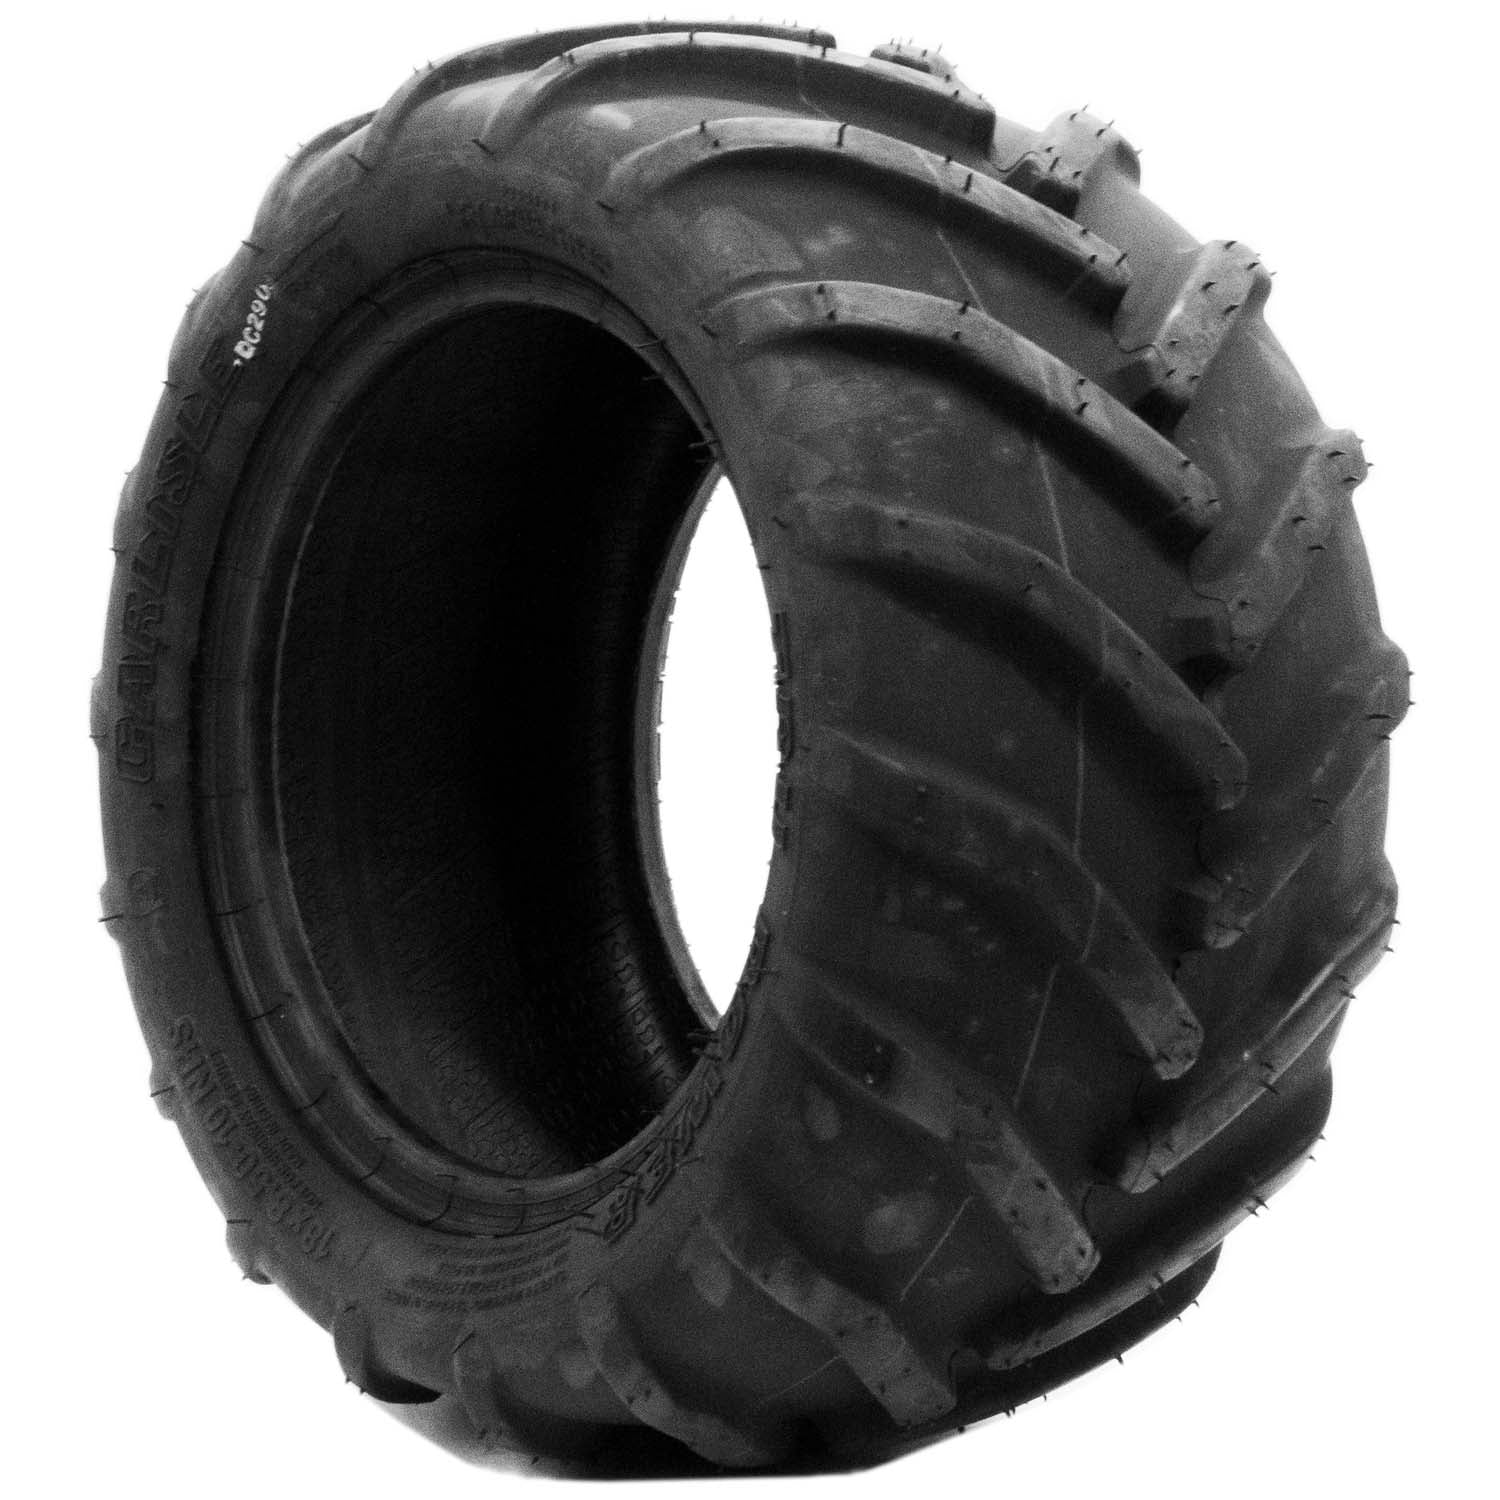 Carlisle Tru Power Lawn and Garden Traction Tire 8ply 26x12.00-12